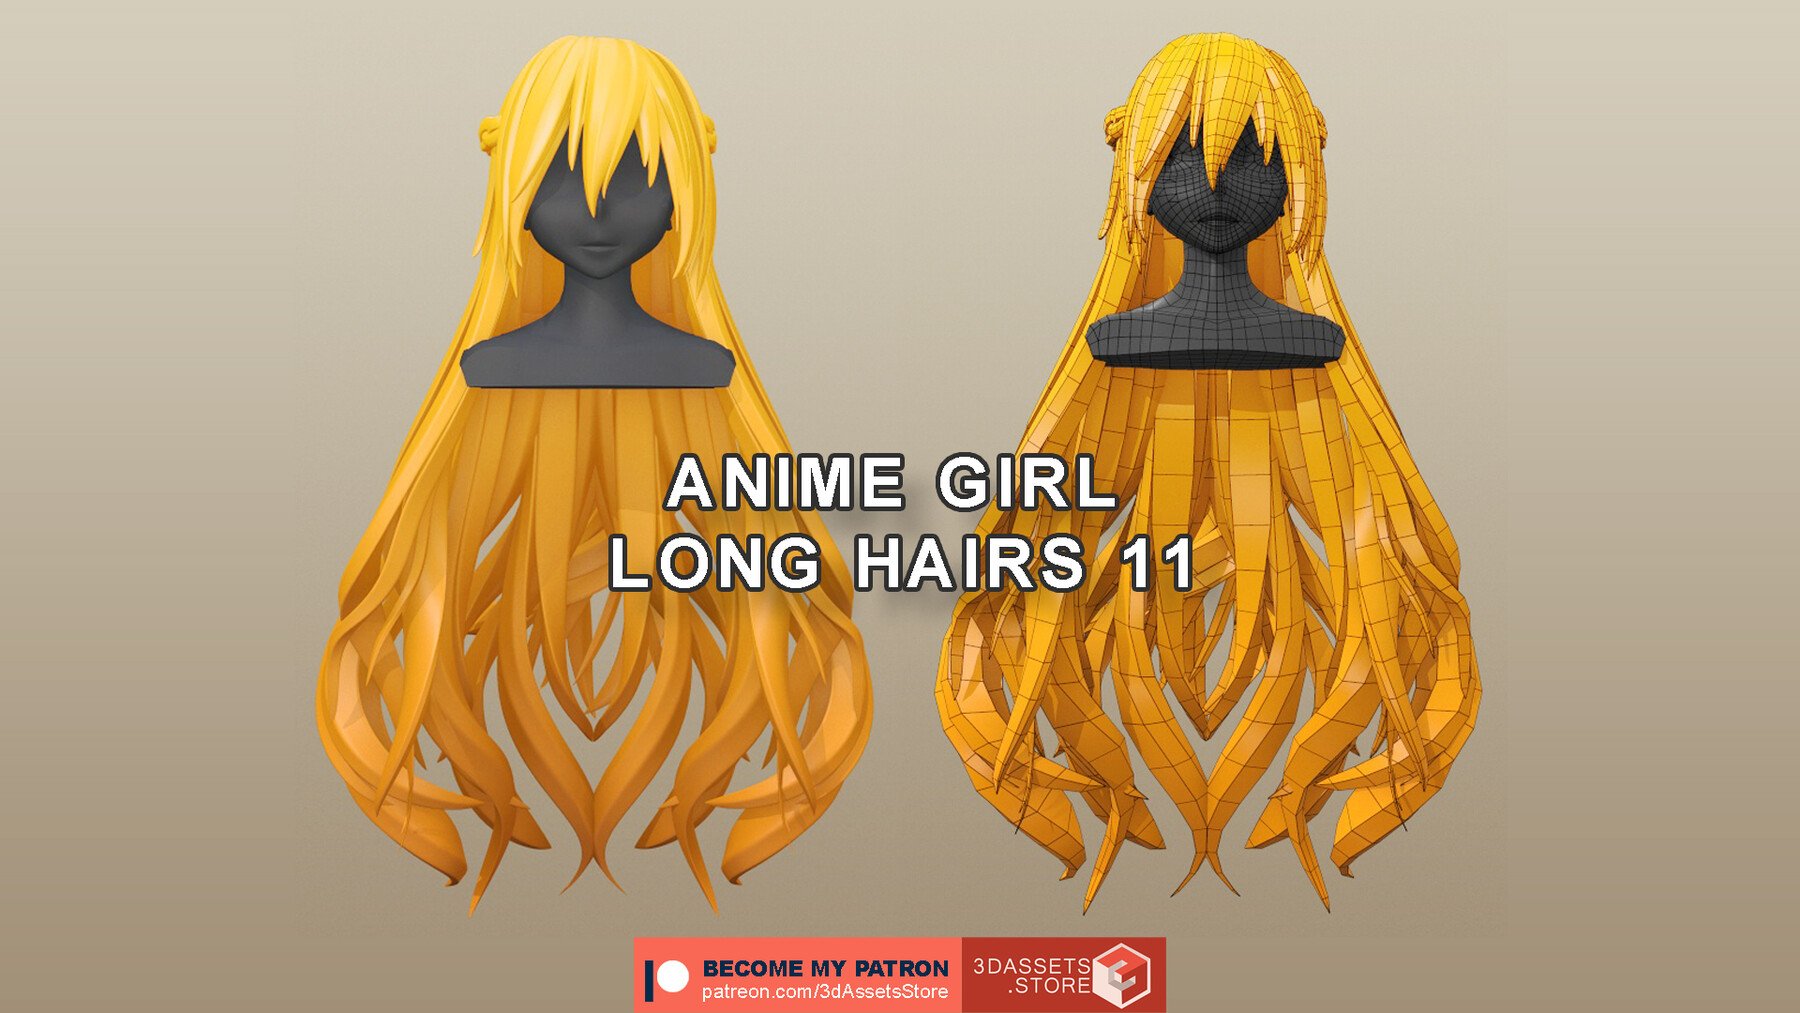 ArtStation - Character - 15 Anime Girl Long Hairs Collection | Resources